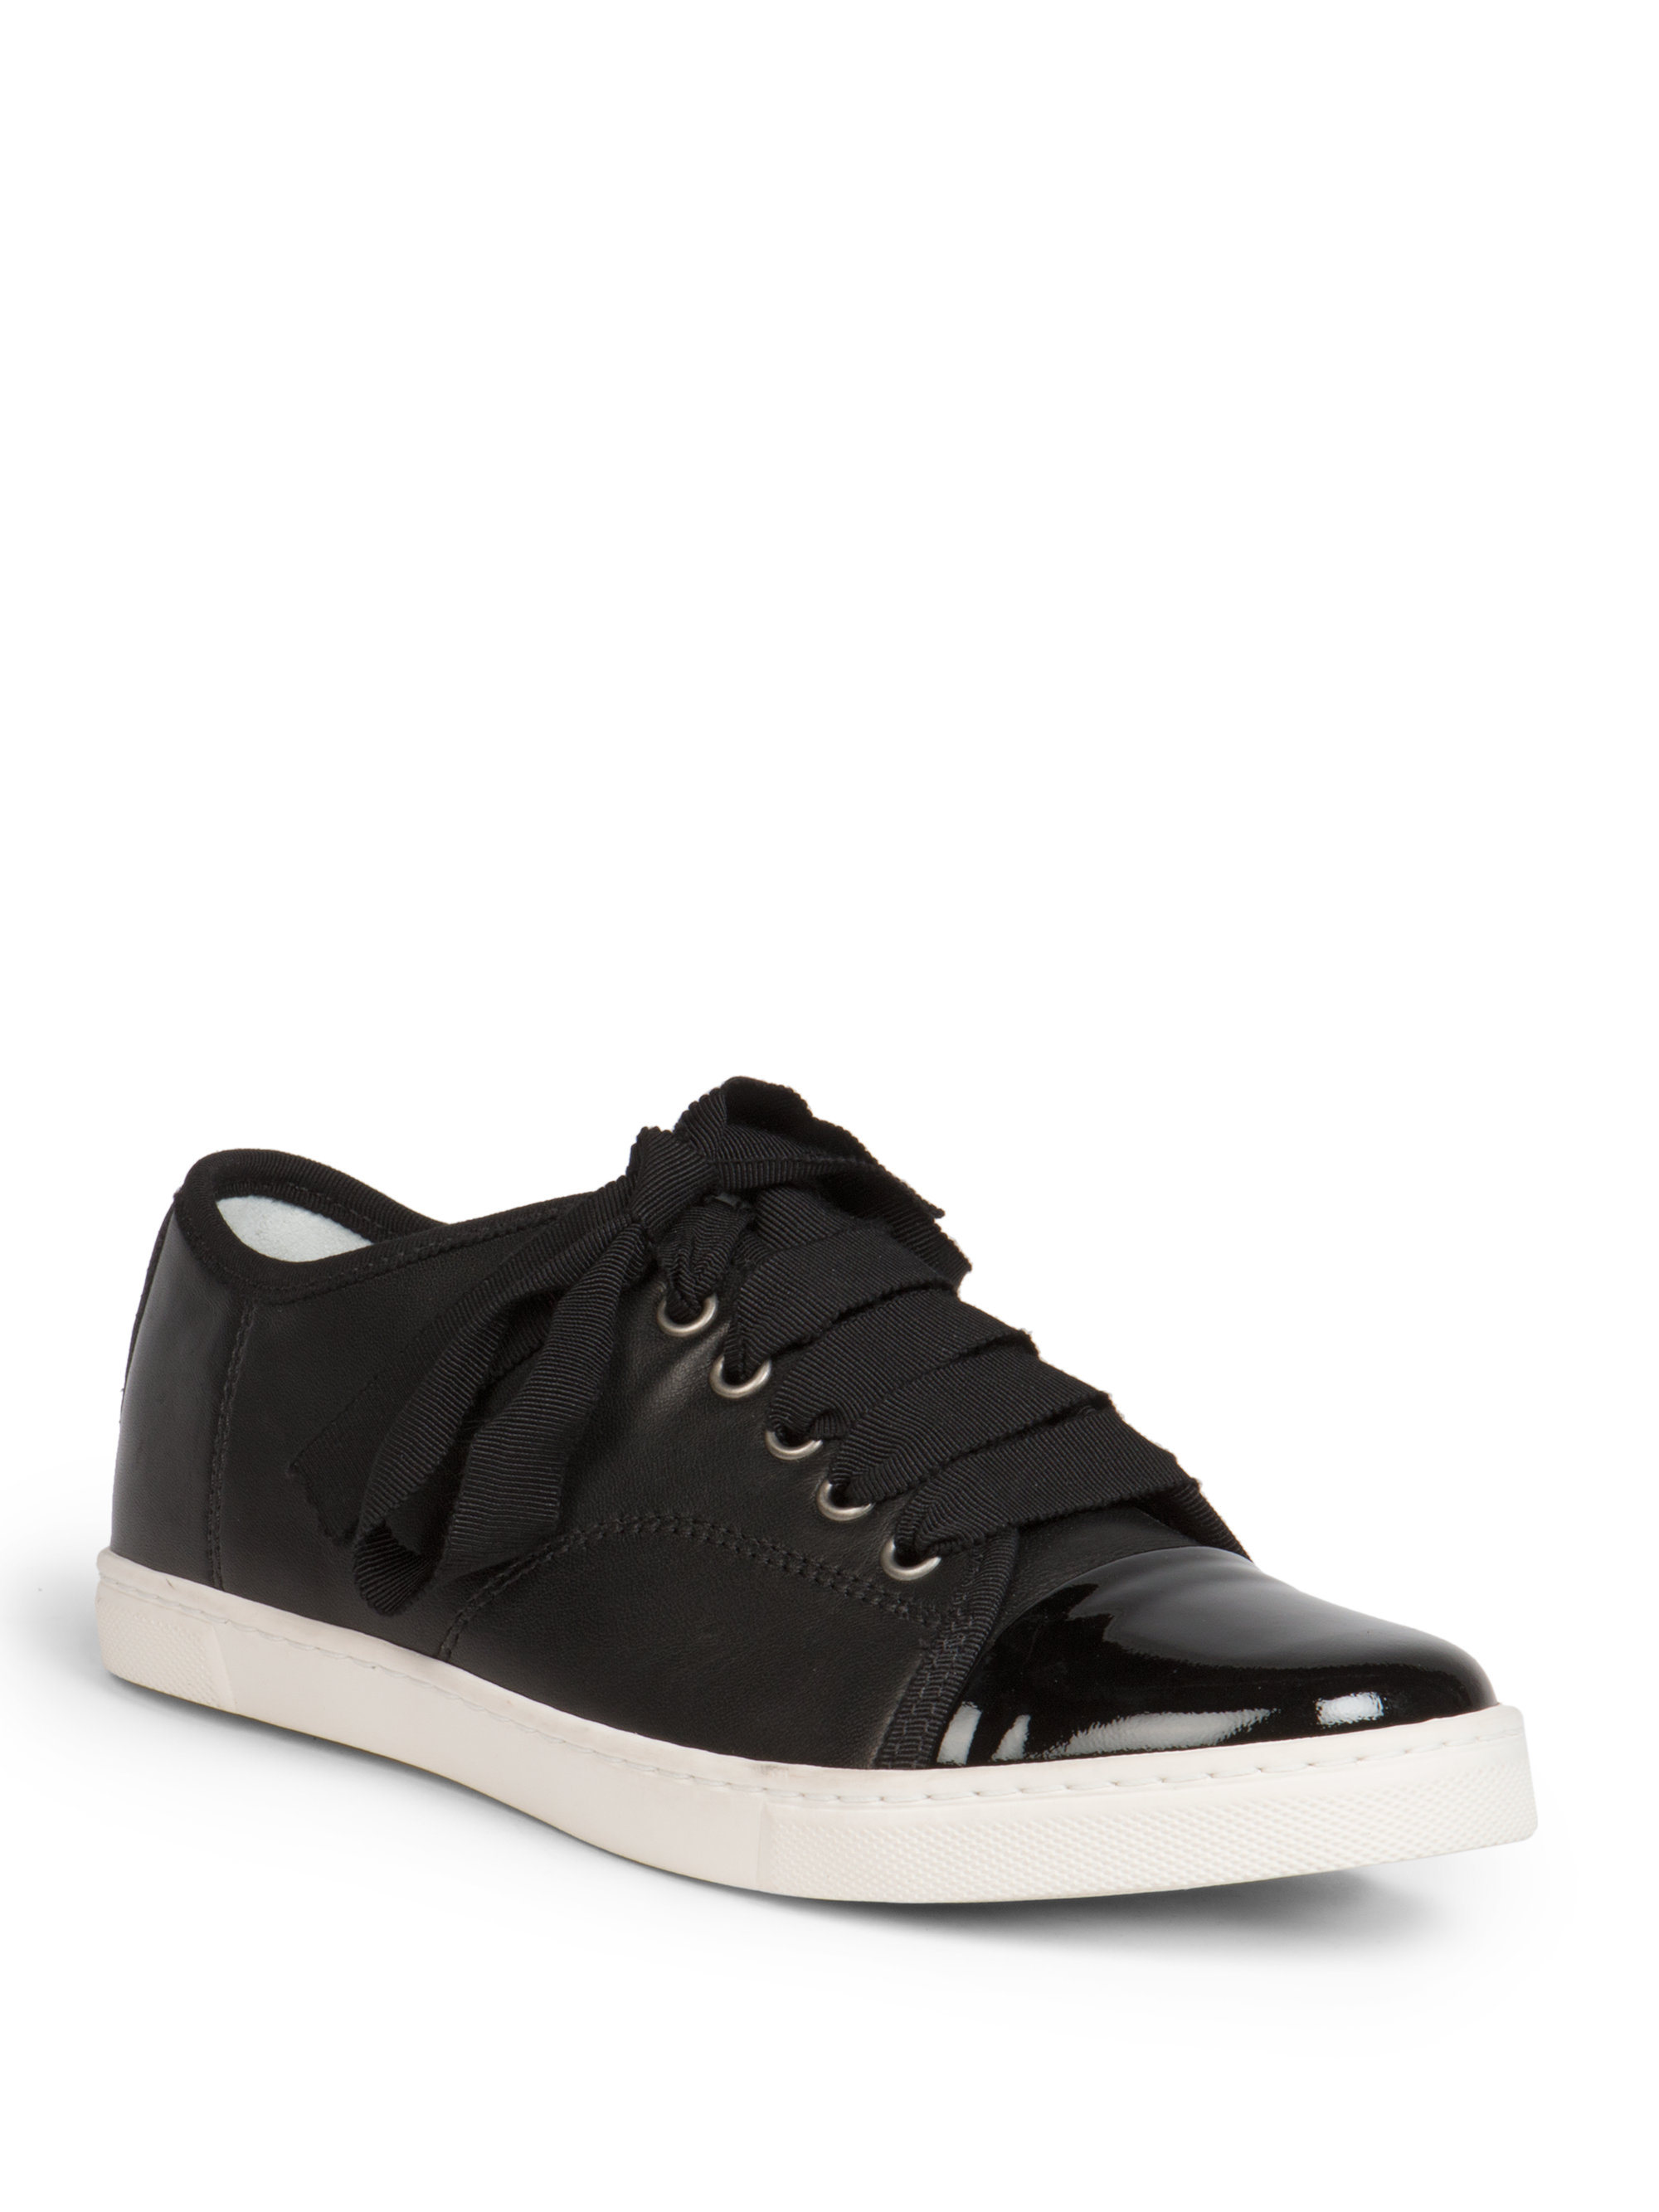 Lanvin Leather Ribbon Lace-up Low-top Sneakers in Black - Lyst